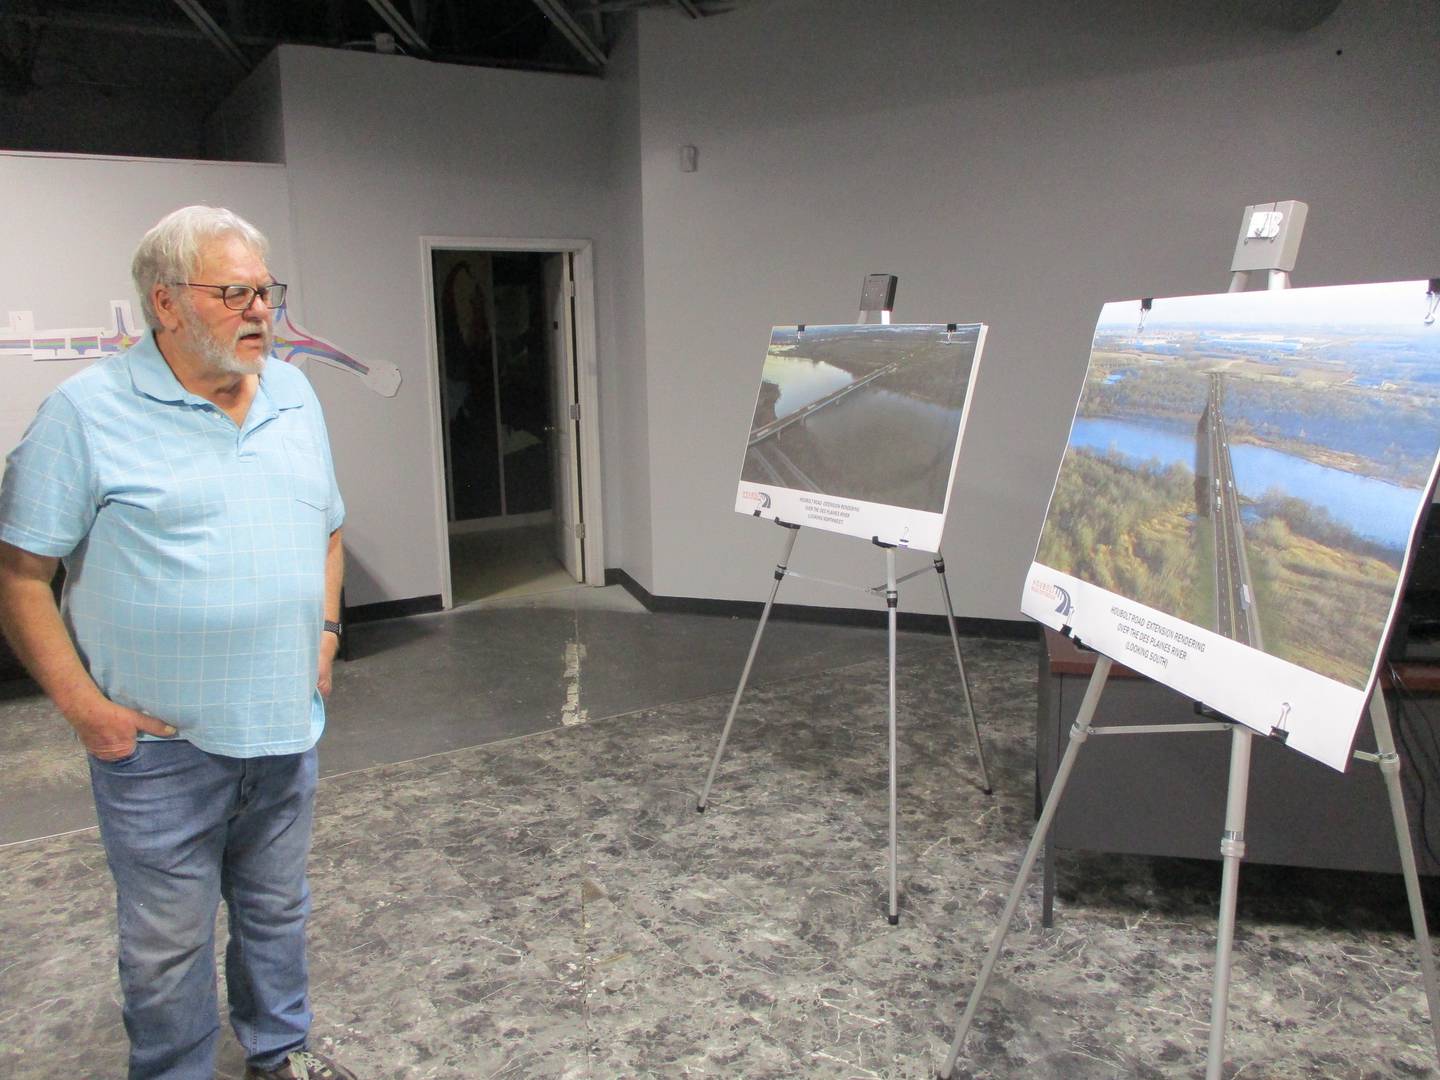 Chuck Link checks out a artist's rendering of the future Houbolt Road bridge during an informational meeting on the project on April 6, 2022 in Joliet.